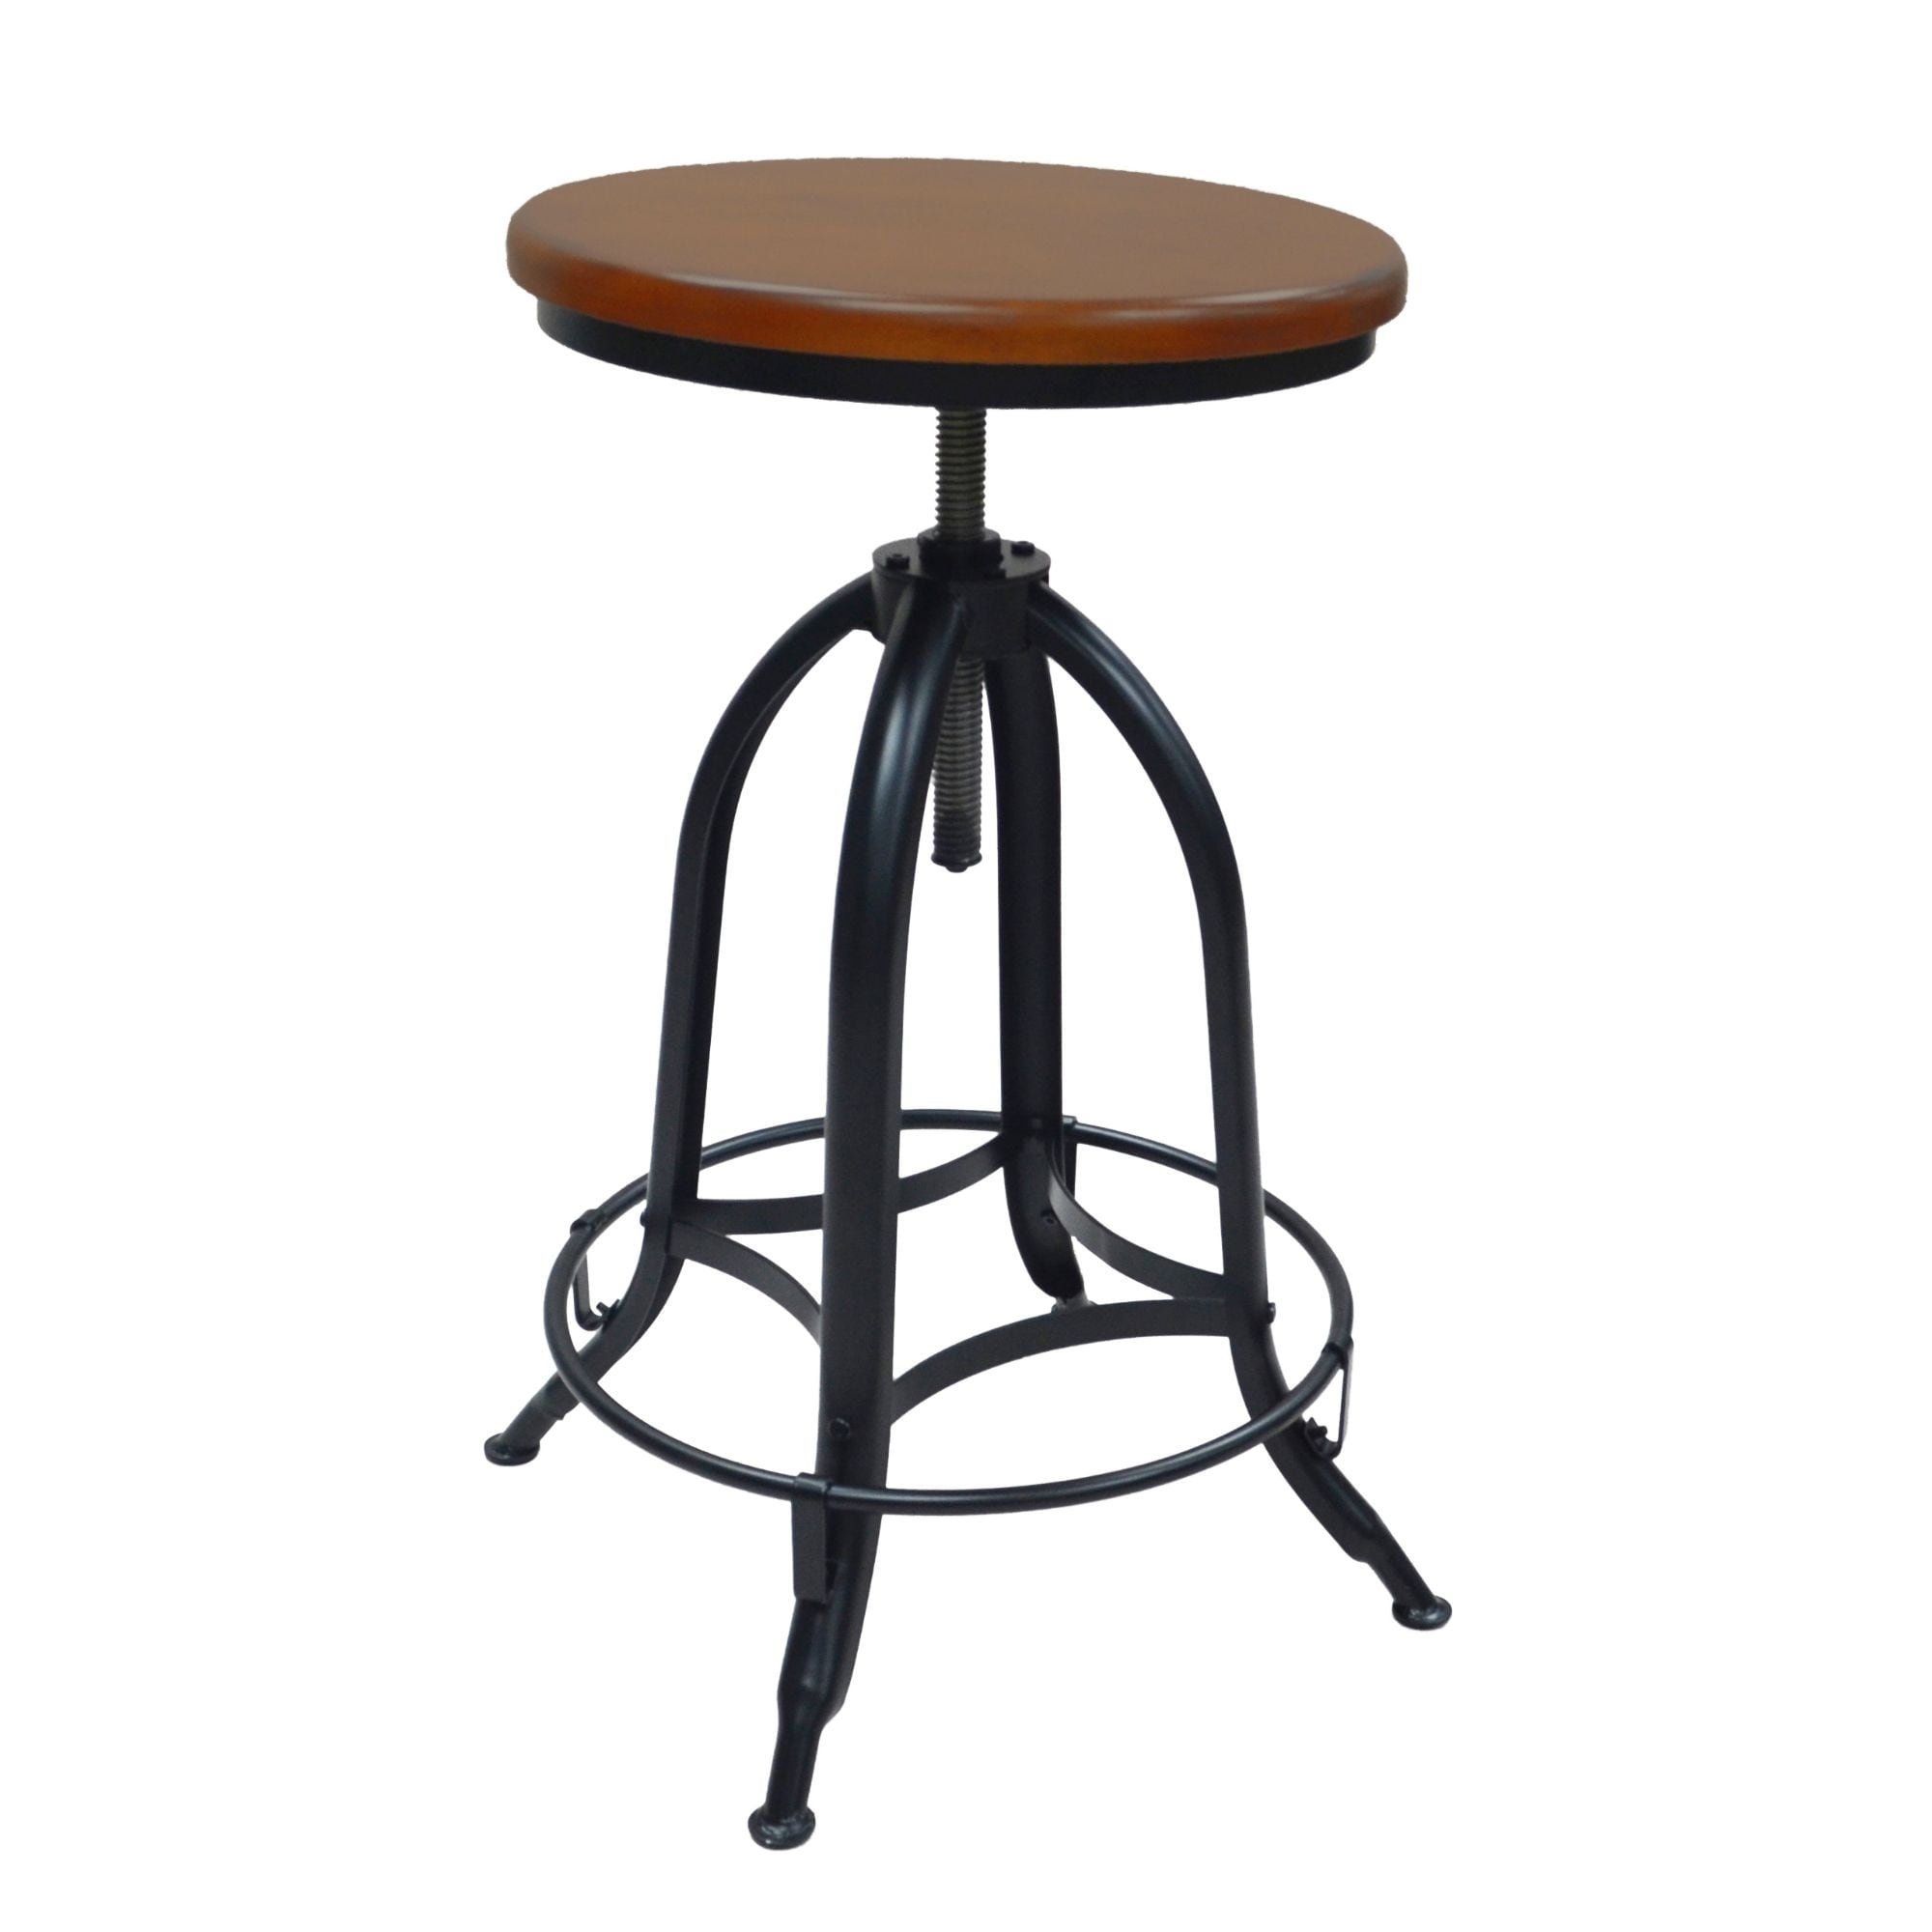 Contemporary Home Living 23 inch Brown and Black Adjustable Stool with Circular Wooden Seat